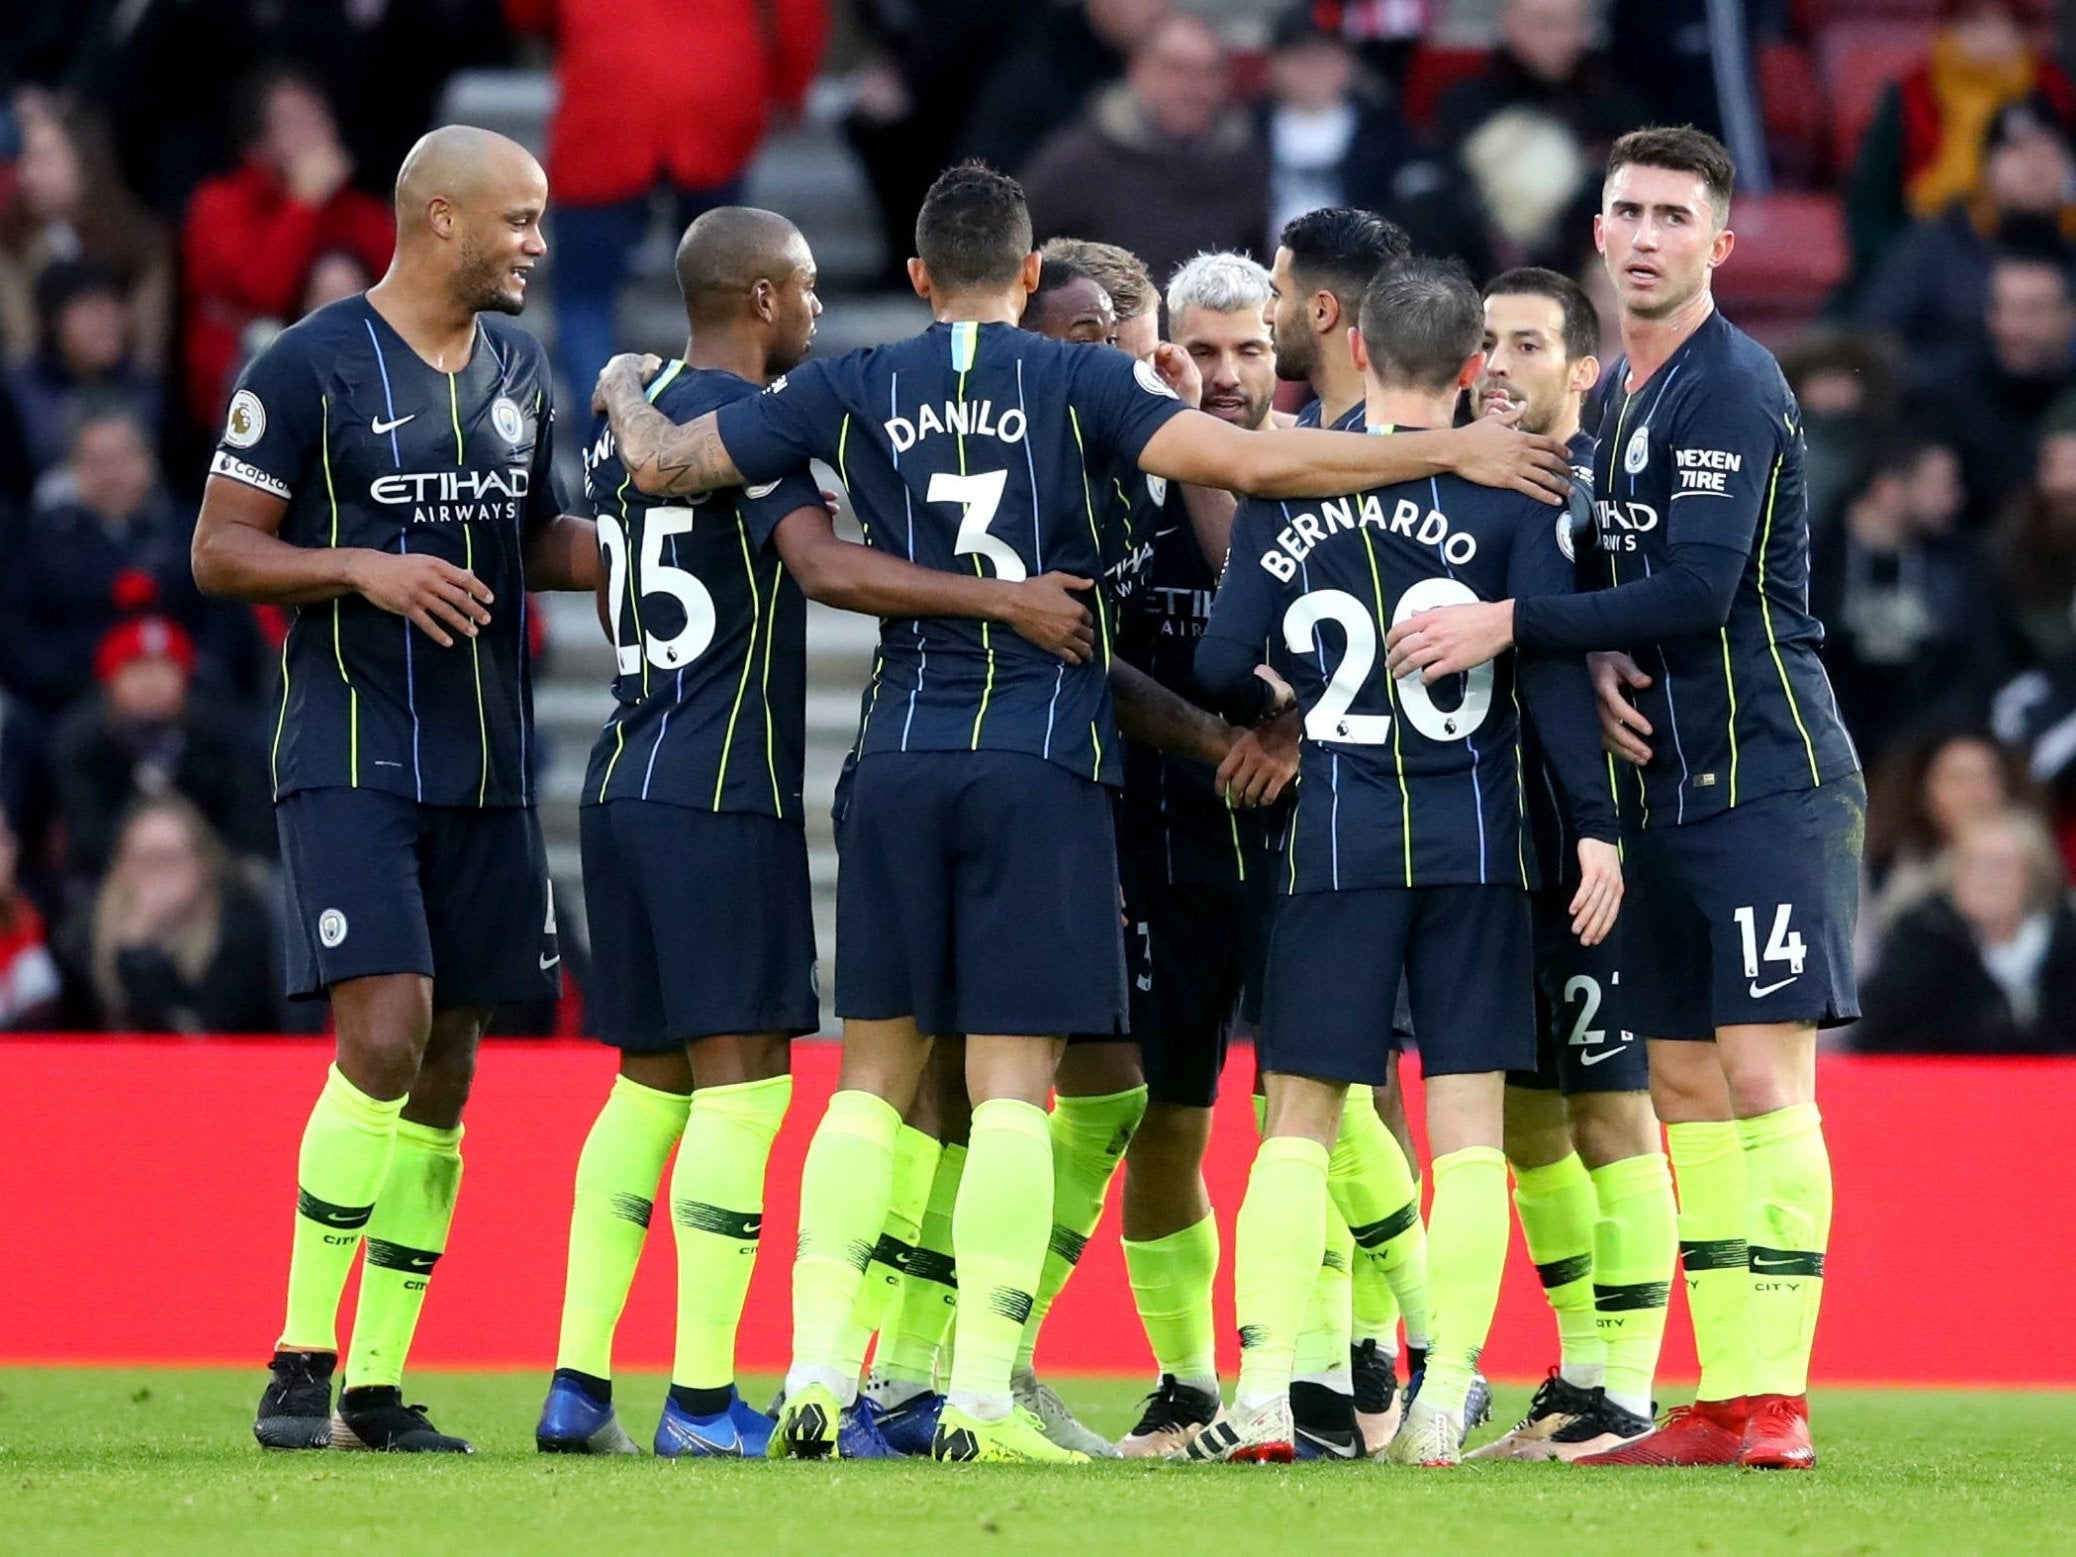 City bounced back after a recent bad run with the win at Southampton